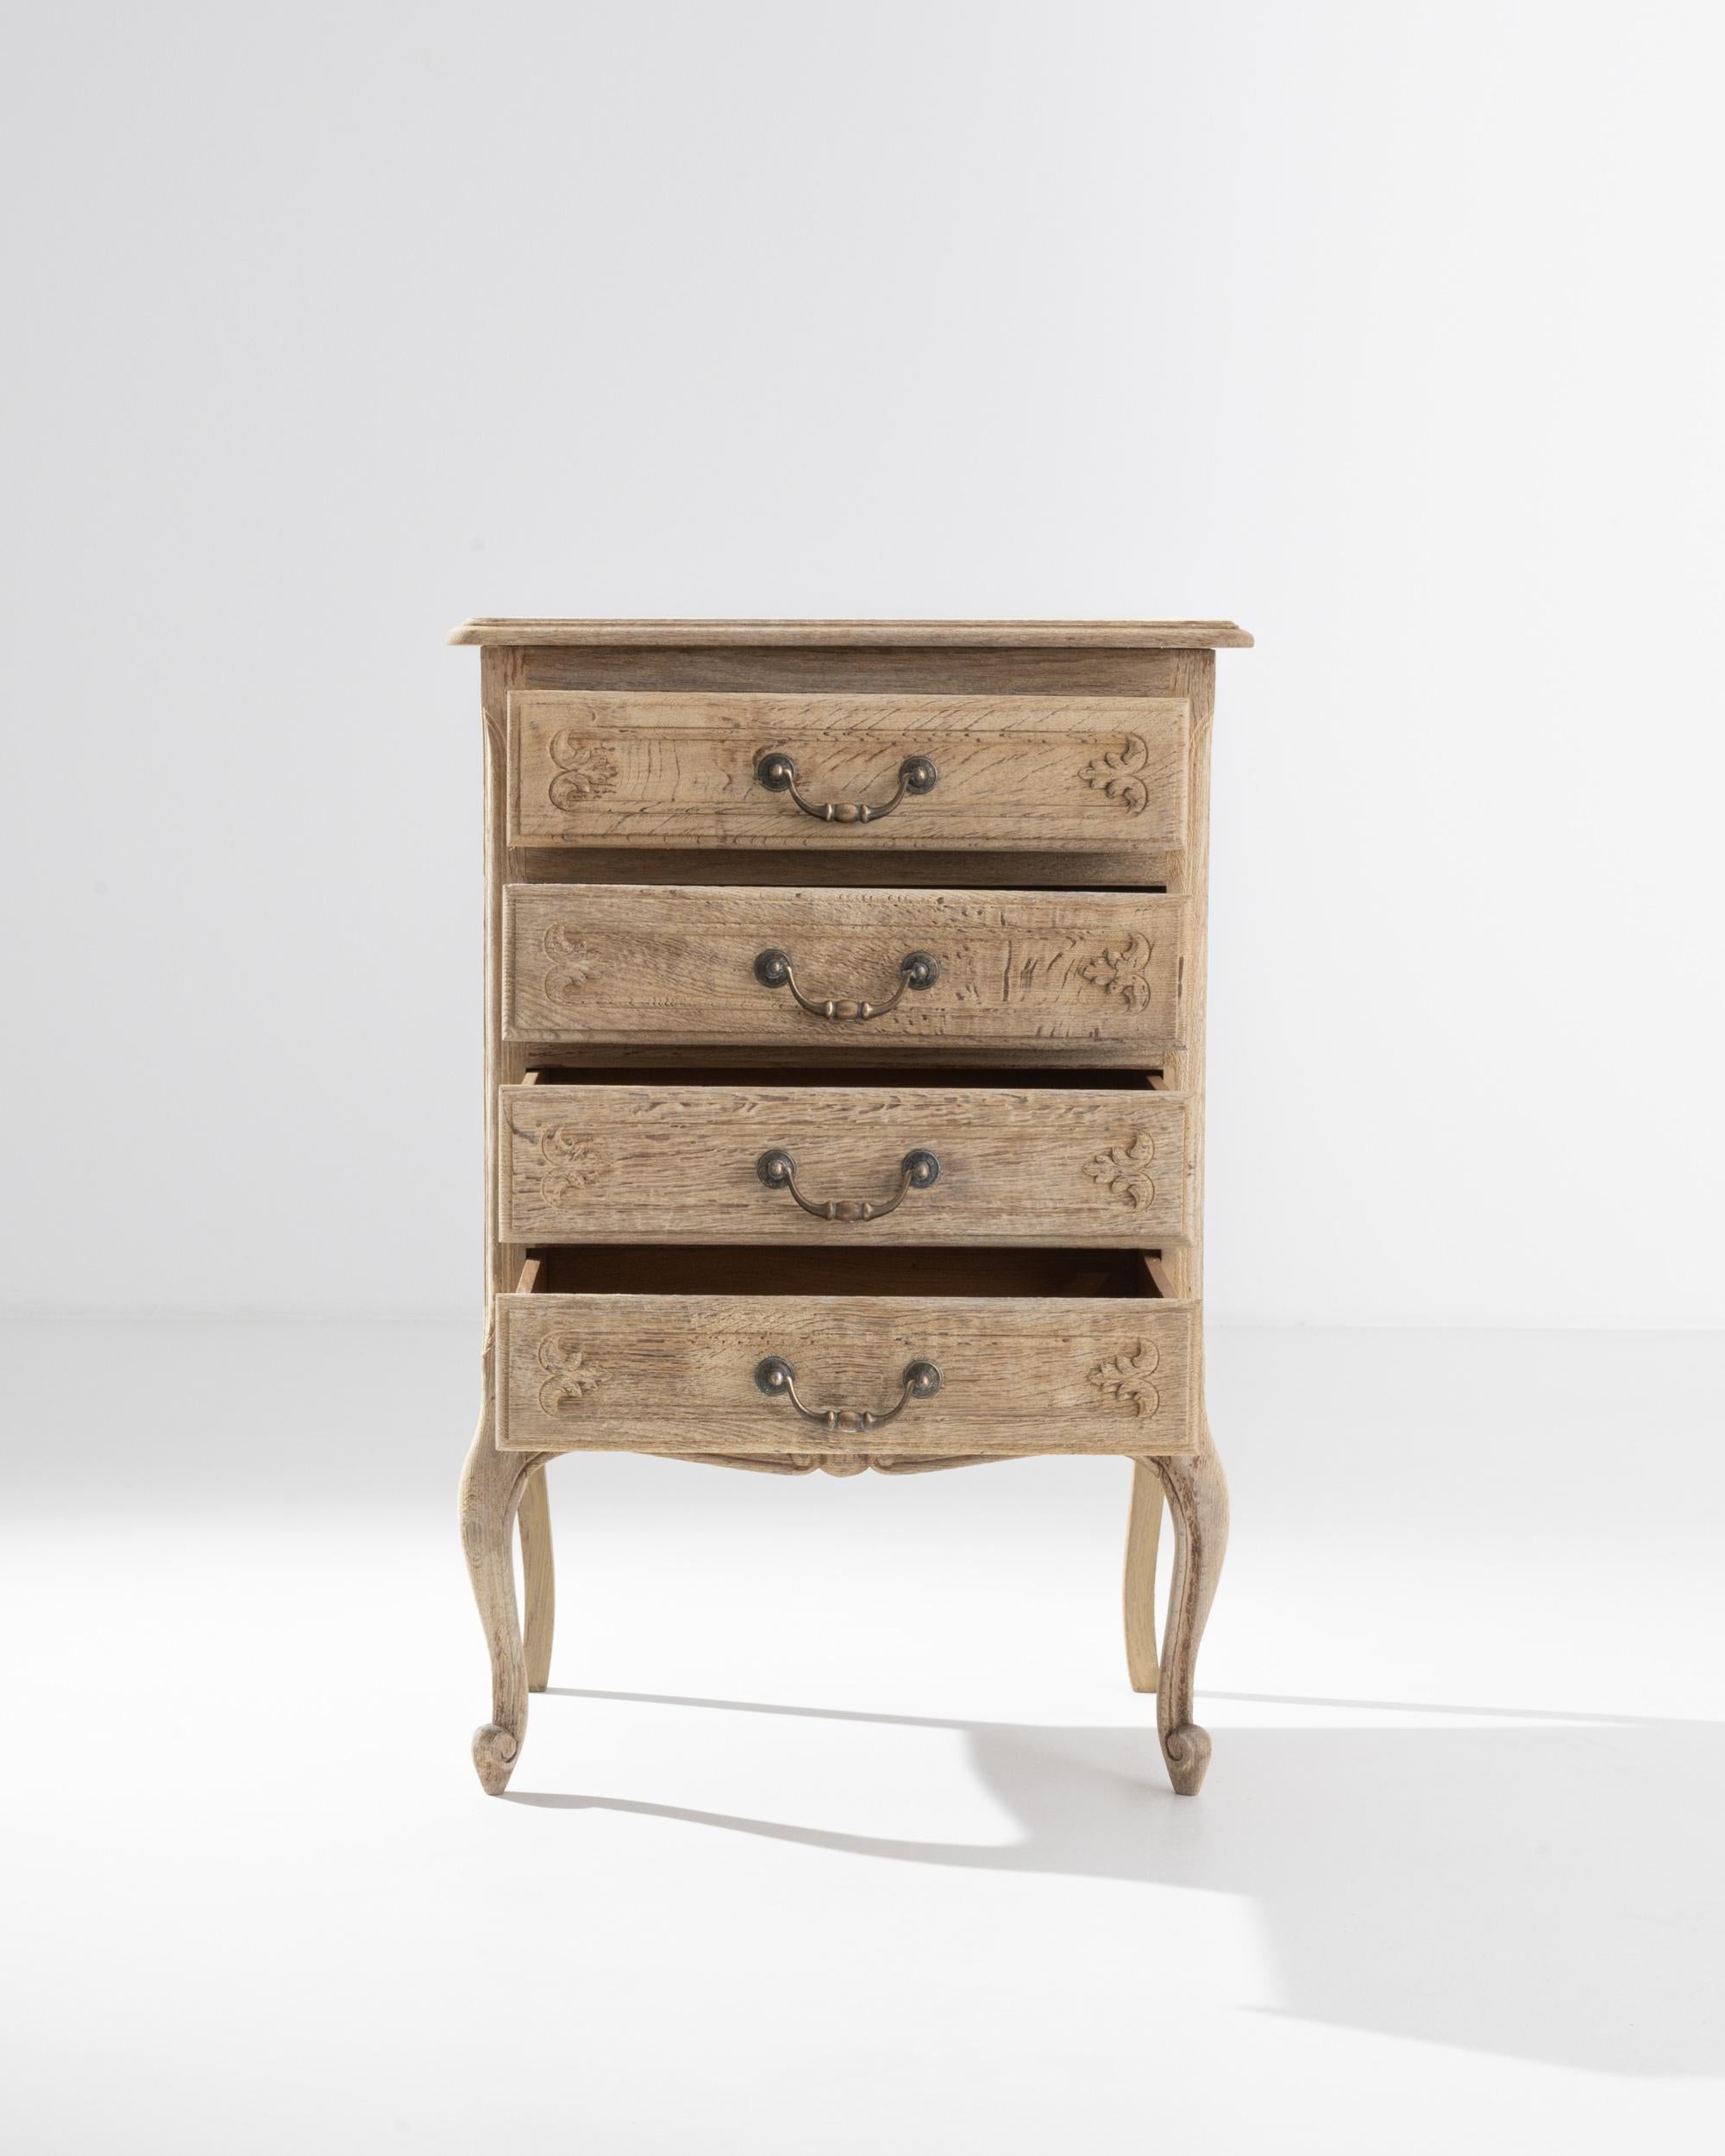 This elegant four-drawer chest features hand-crafted ornate details and graceful cabriole legs that show the true craftsmanship that went into creating this piece. Created in France during the 20th century, this dresser was handcrafted from oak that